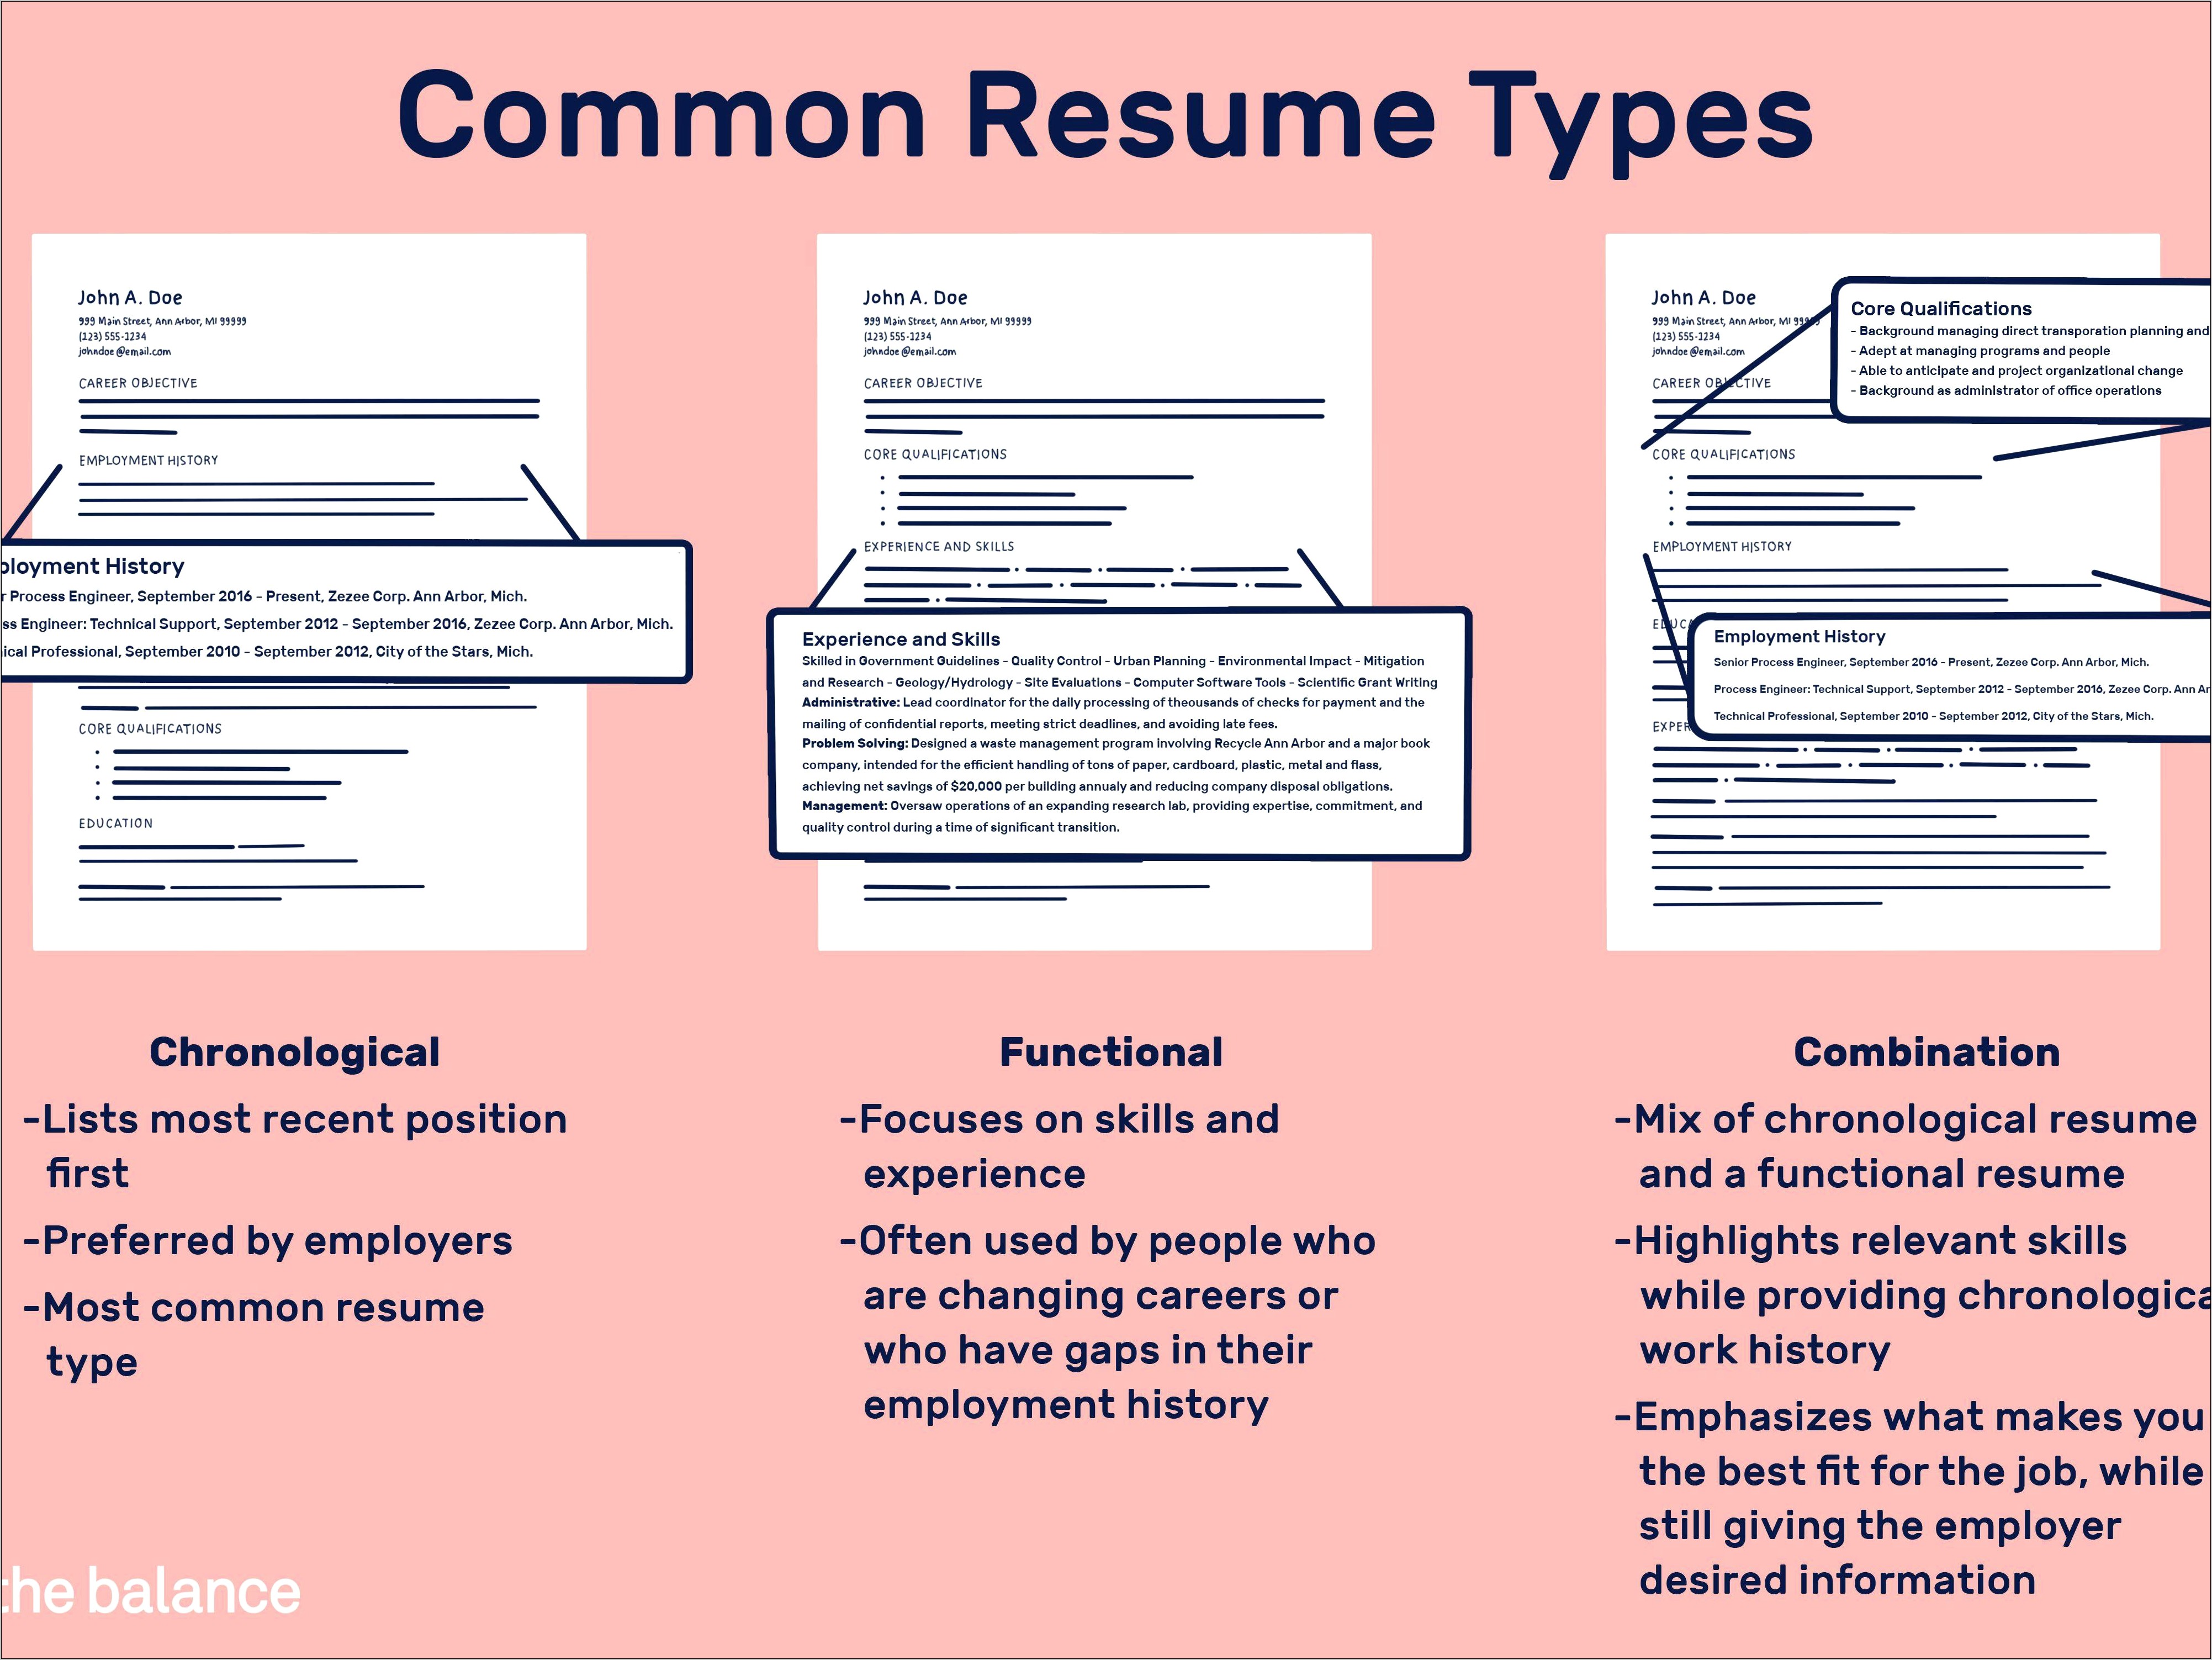 Should You Change Your Resume For Each Job